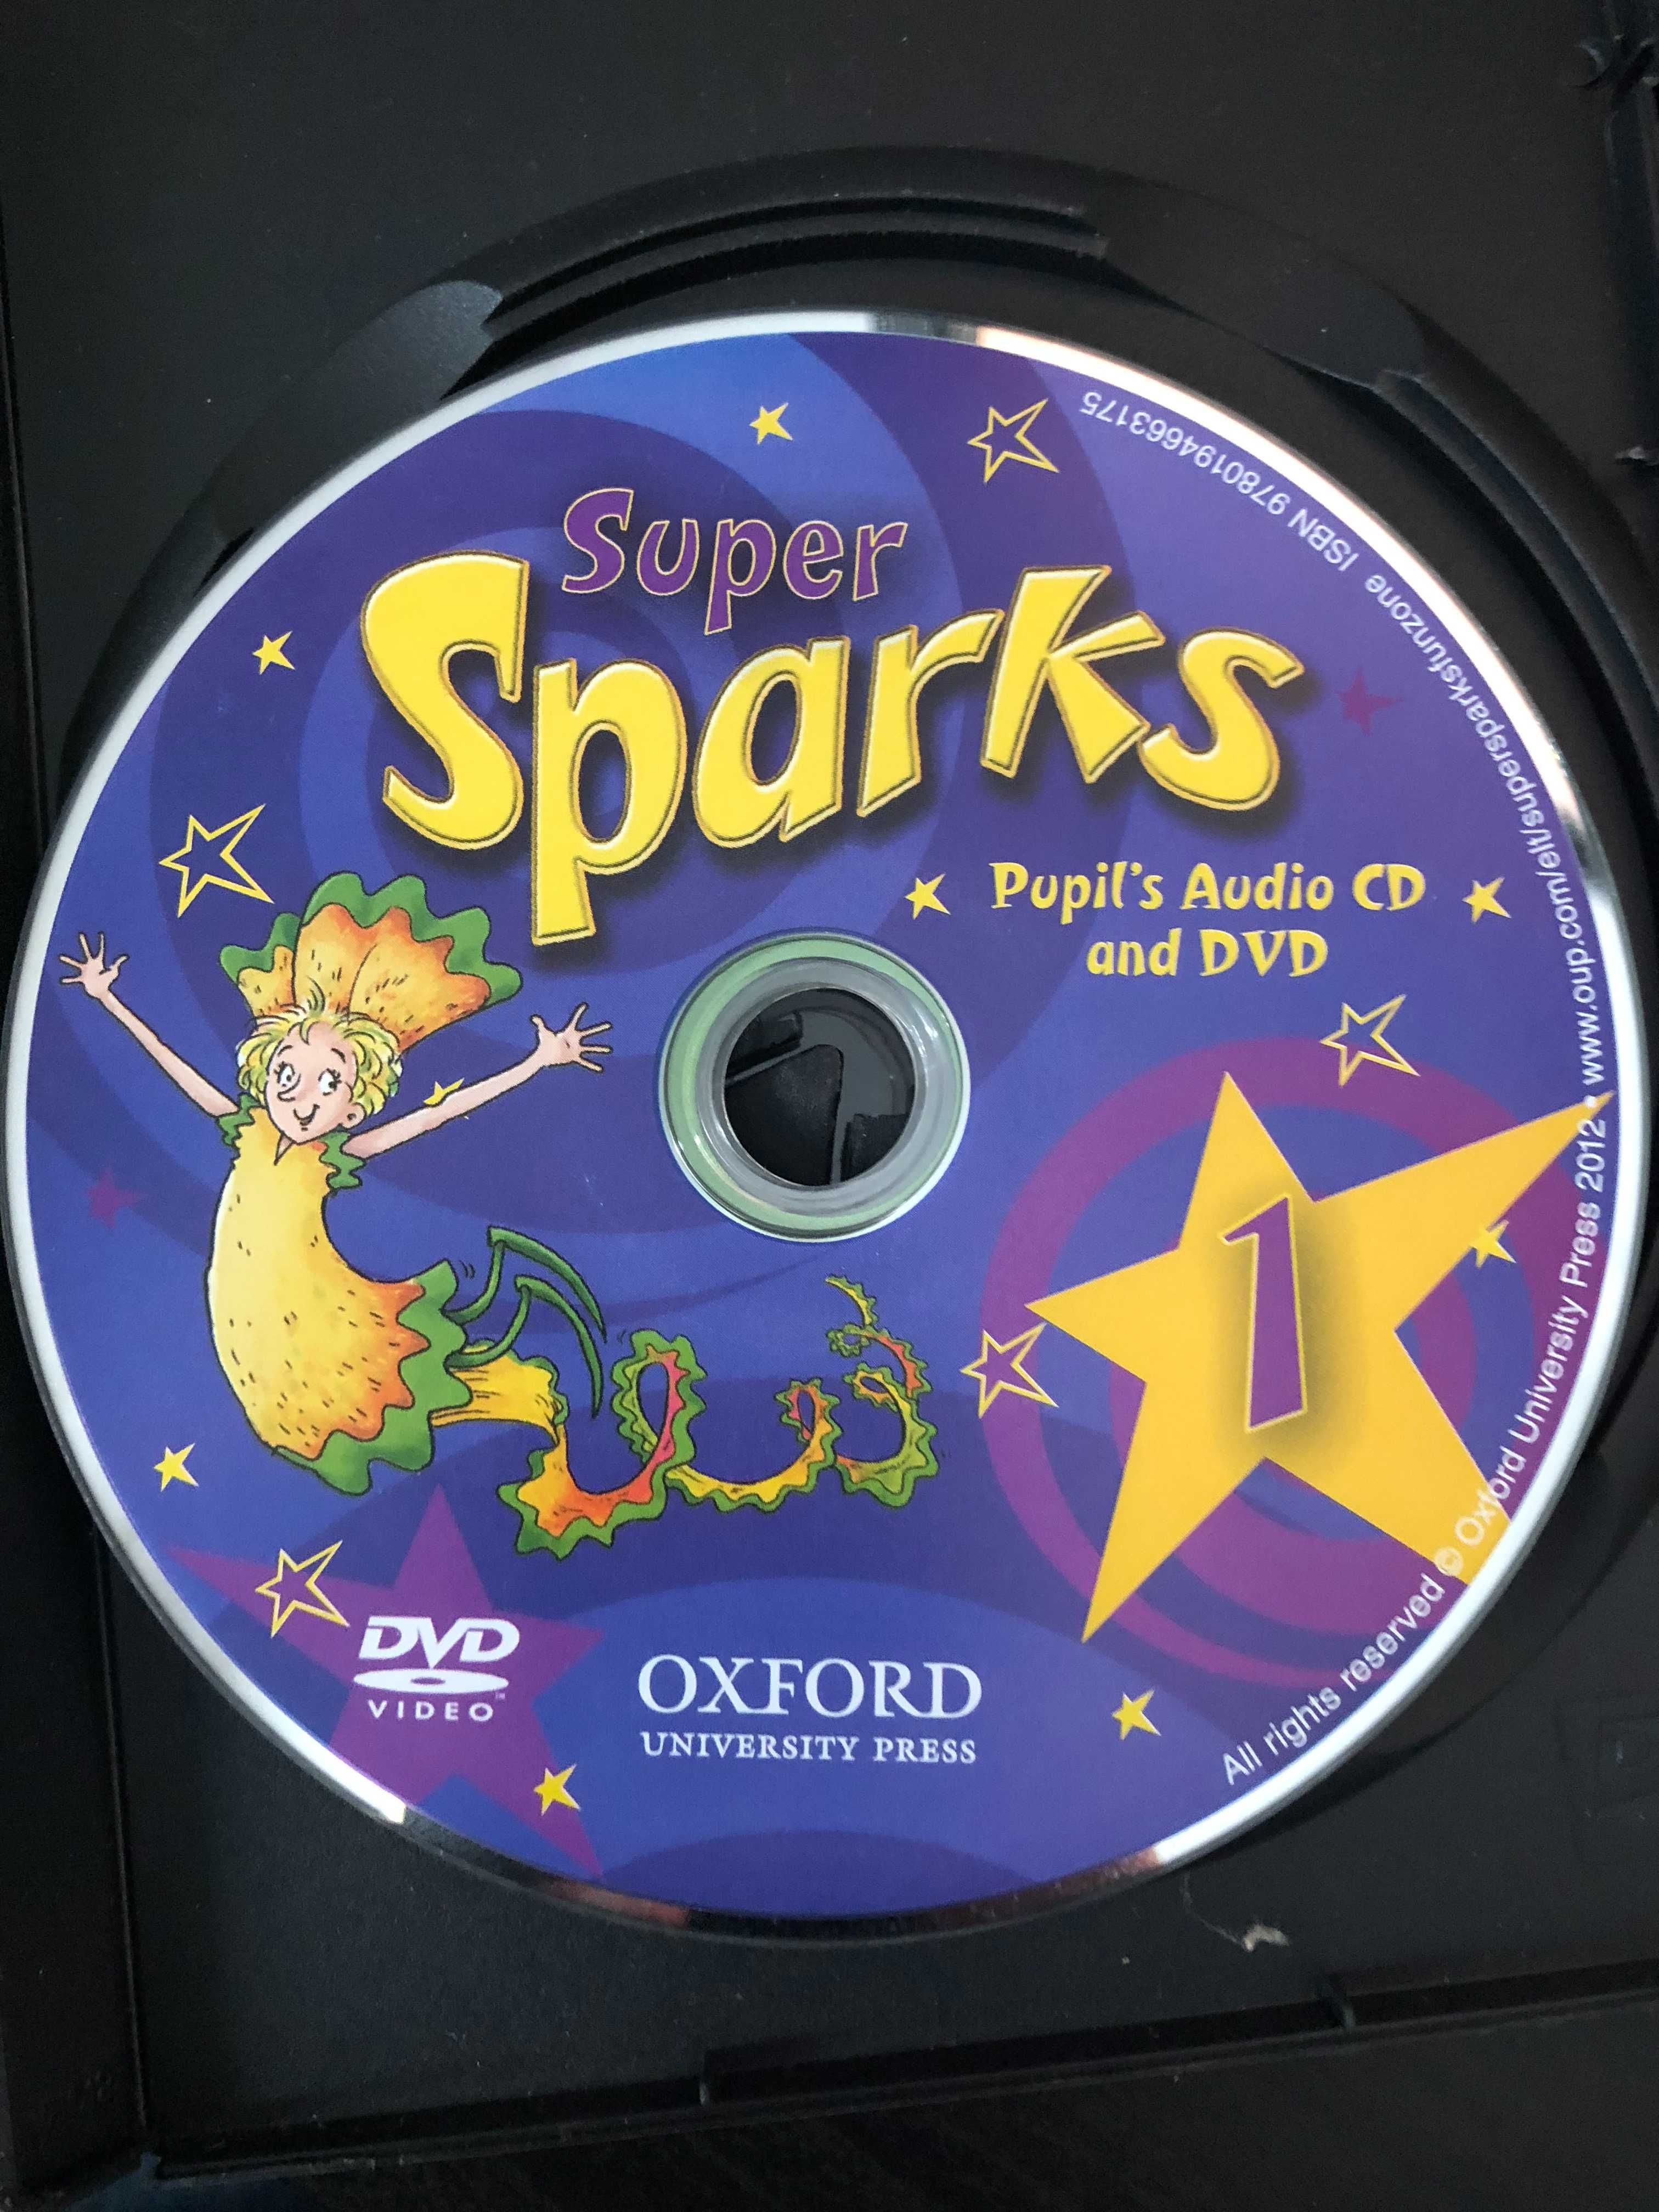 Super Sparks Pupil audio cd and dvd